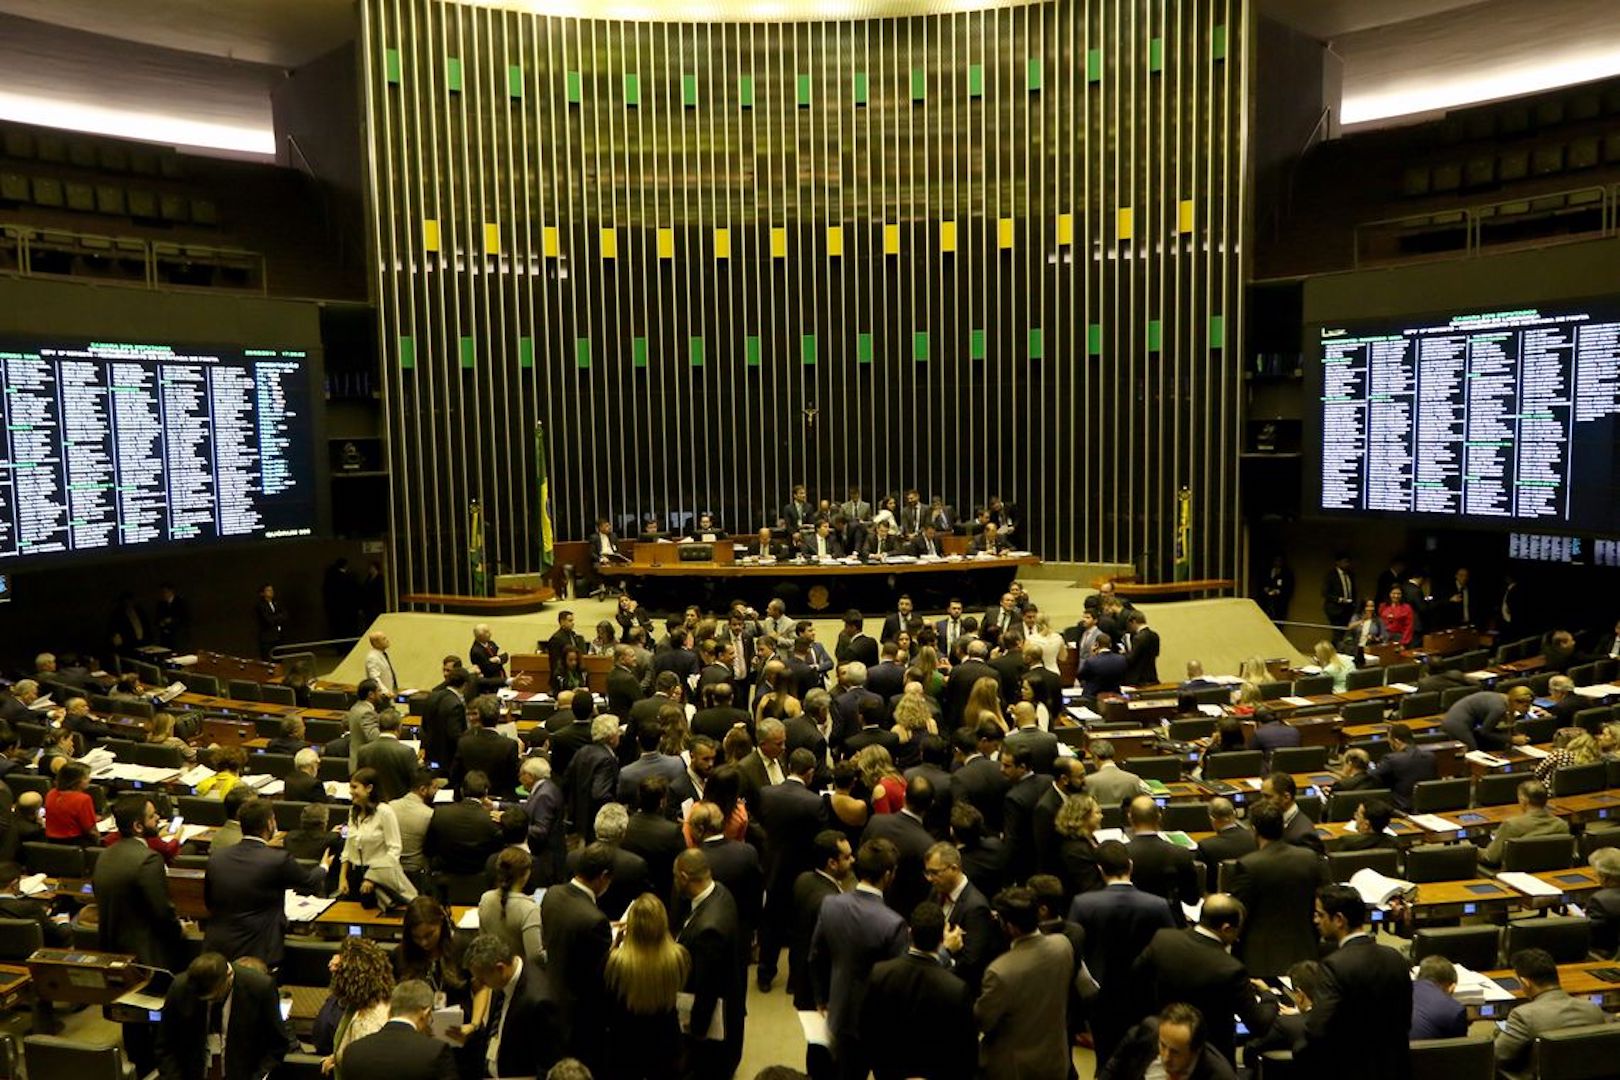 Five opposition parties in the Chamber of Deputies have announced that they will henceforth obstruct all the voting agendas in the House.